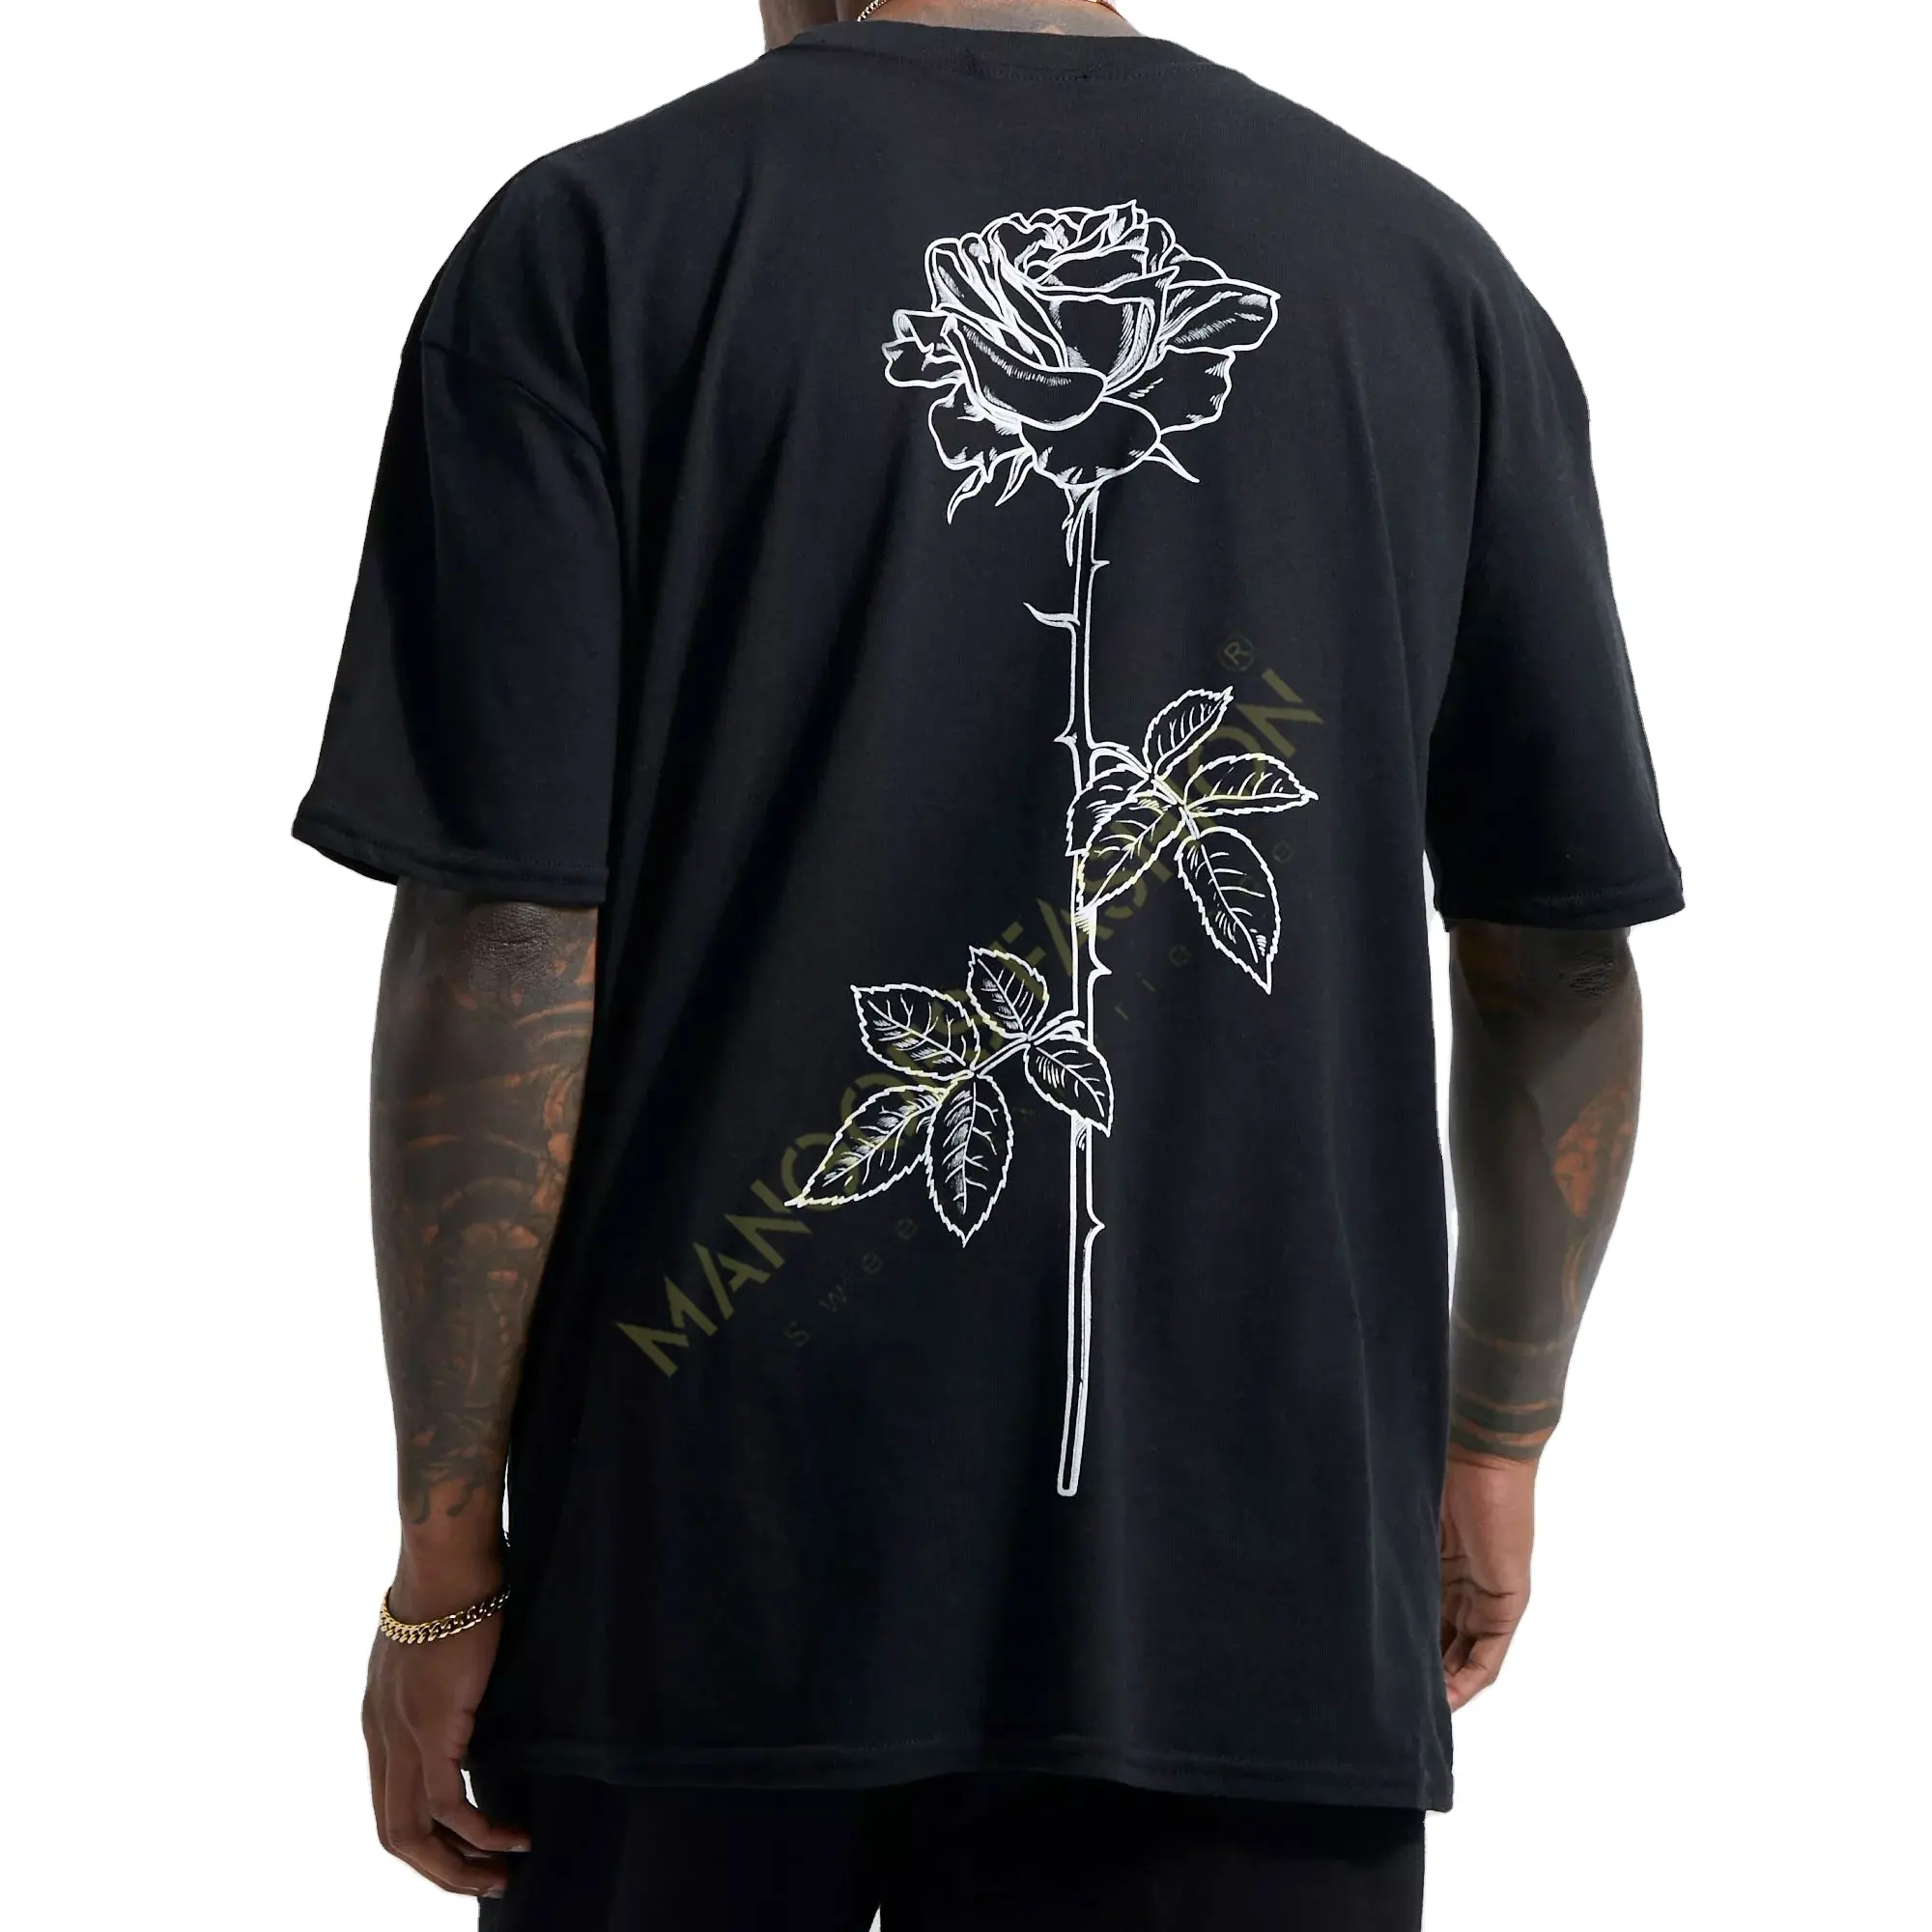 Customizable Men's Graphic T-Shirt: Line Drawn Rose Stem Print on Black | Personalize Your Style Wholesalers